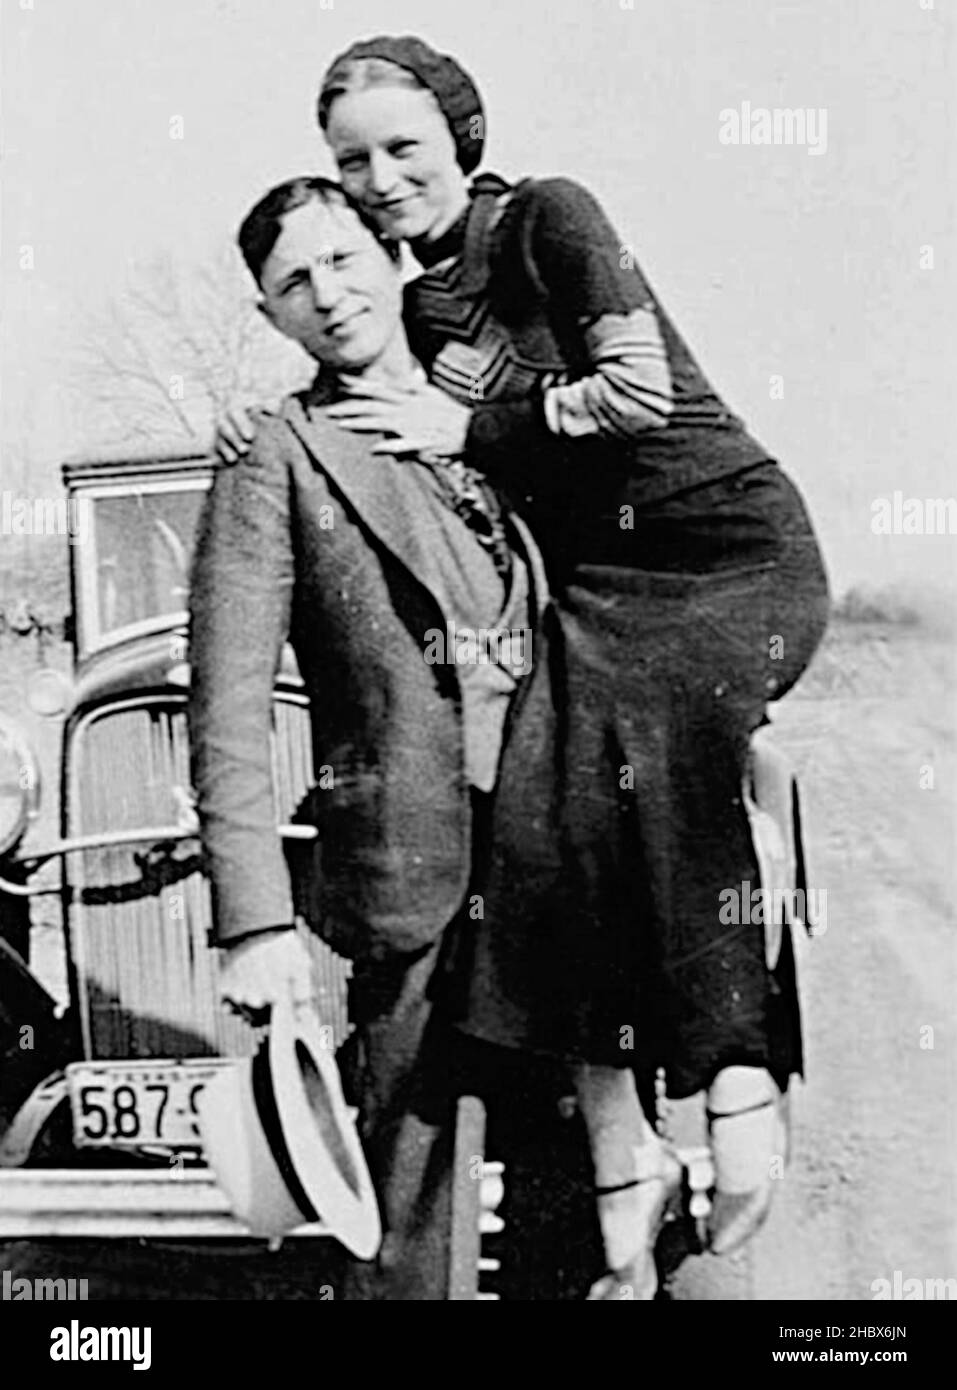 Bonnie and Clyde Stock Photo